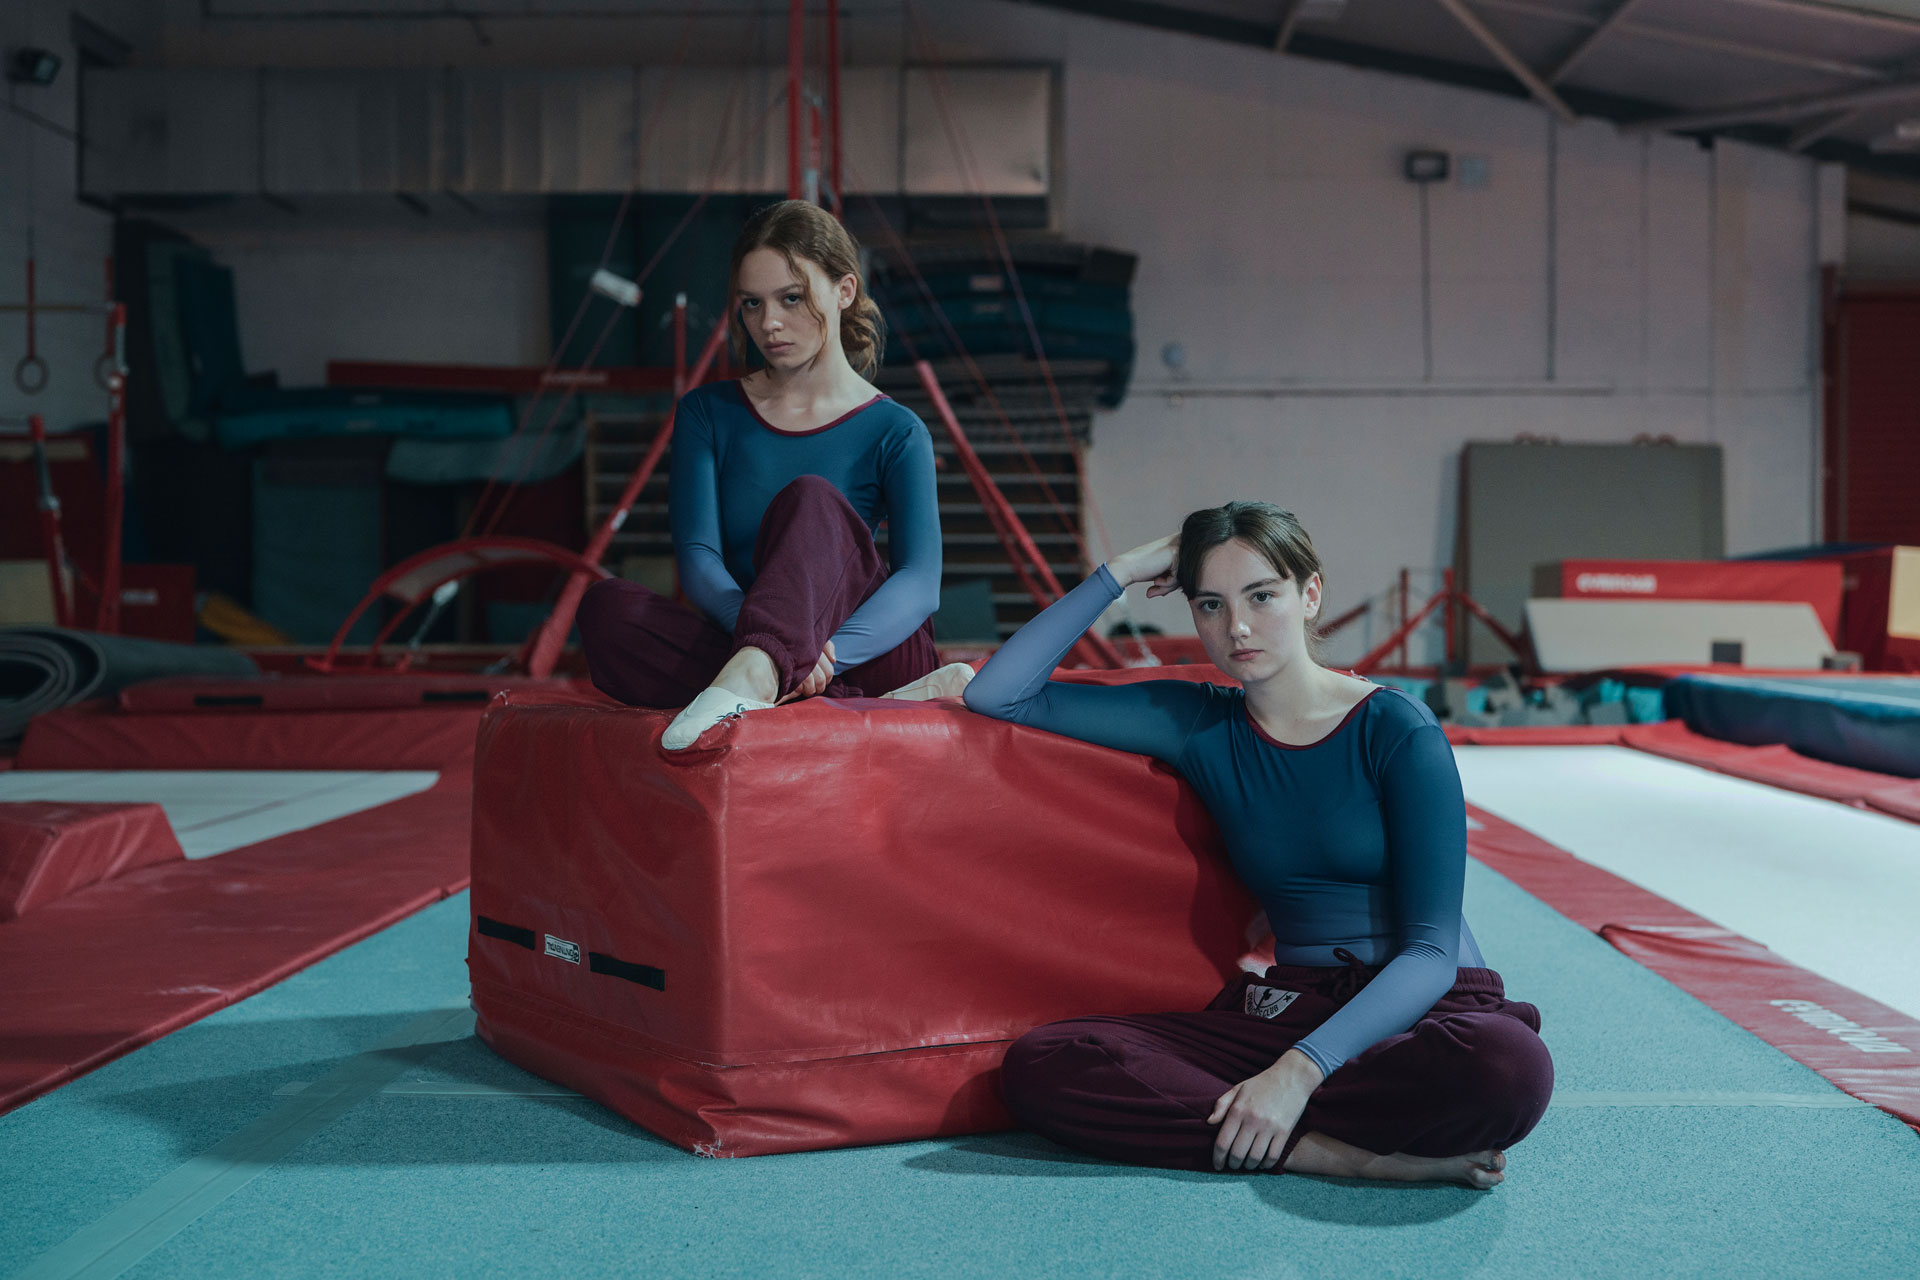 Gymnasts sitting in a gymnasium in 'The Gathering'